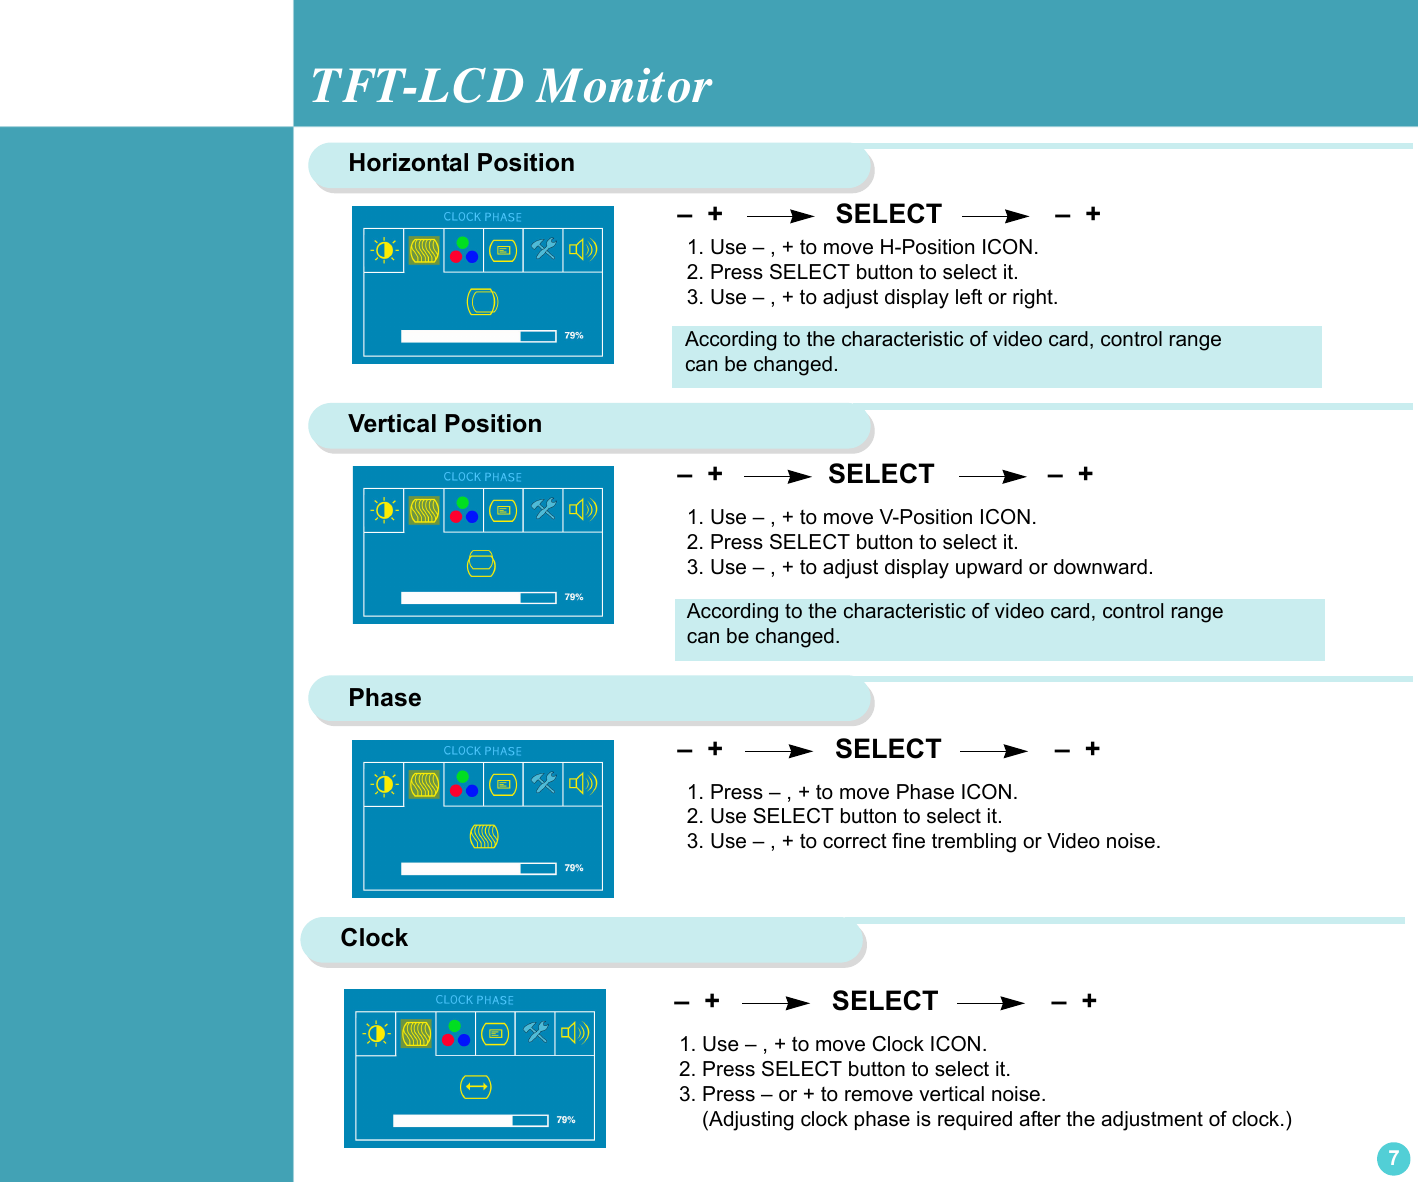 TFT-LCD Monitor7Horizontal PositionVertical Position –  +                SELECT               –  +  –  +               SELECT               –  +  1. Use – , + to move V-Position ICON.2. Press SELECT button to select it.3. Use – , + to adjust display upward or downward.Phase1. Press – , + to move Phase ICON.2. Use SELECT button to select it.3. Use – , + to correct fine trembling or Video noise.1. Use – , + to move H-Position ICON.2. Press SELECT button to select it.3. Use – , + to adjust display left or right. –  +                SELECT               –  +     According to the characteristic of video card, control range can be changed.According to the characteristic of video card, control range can be changed.Clock 1. Use – , + to move Clock ICON.2. Press SELECT button to select it.3. Press – or + to remove vertical noise.    (Adjusting clock phase is required after the adjustment of clock.)  –  +                SELECT               –  +  